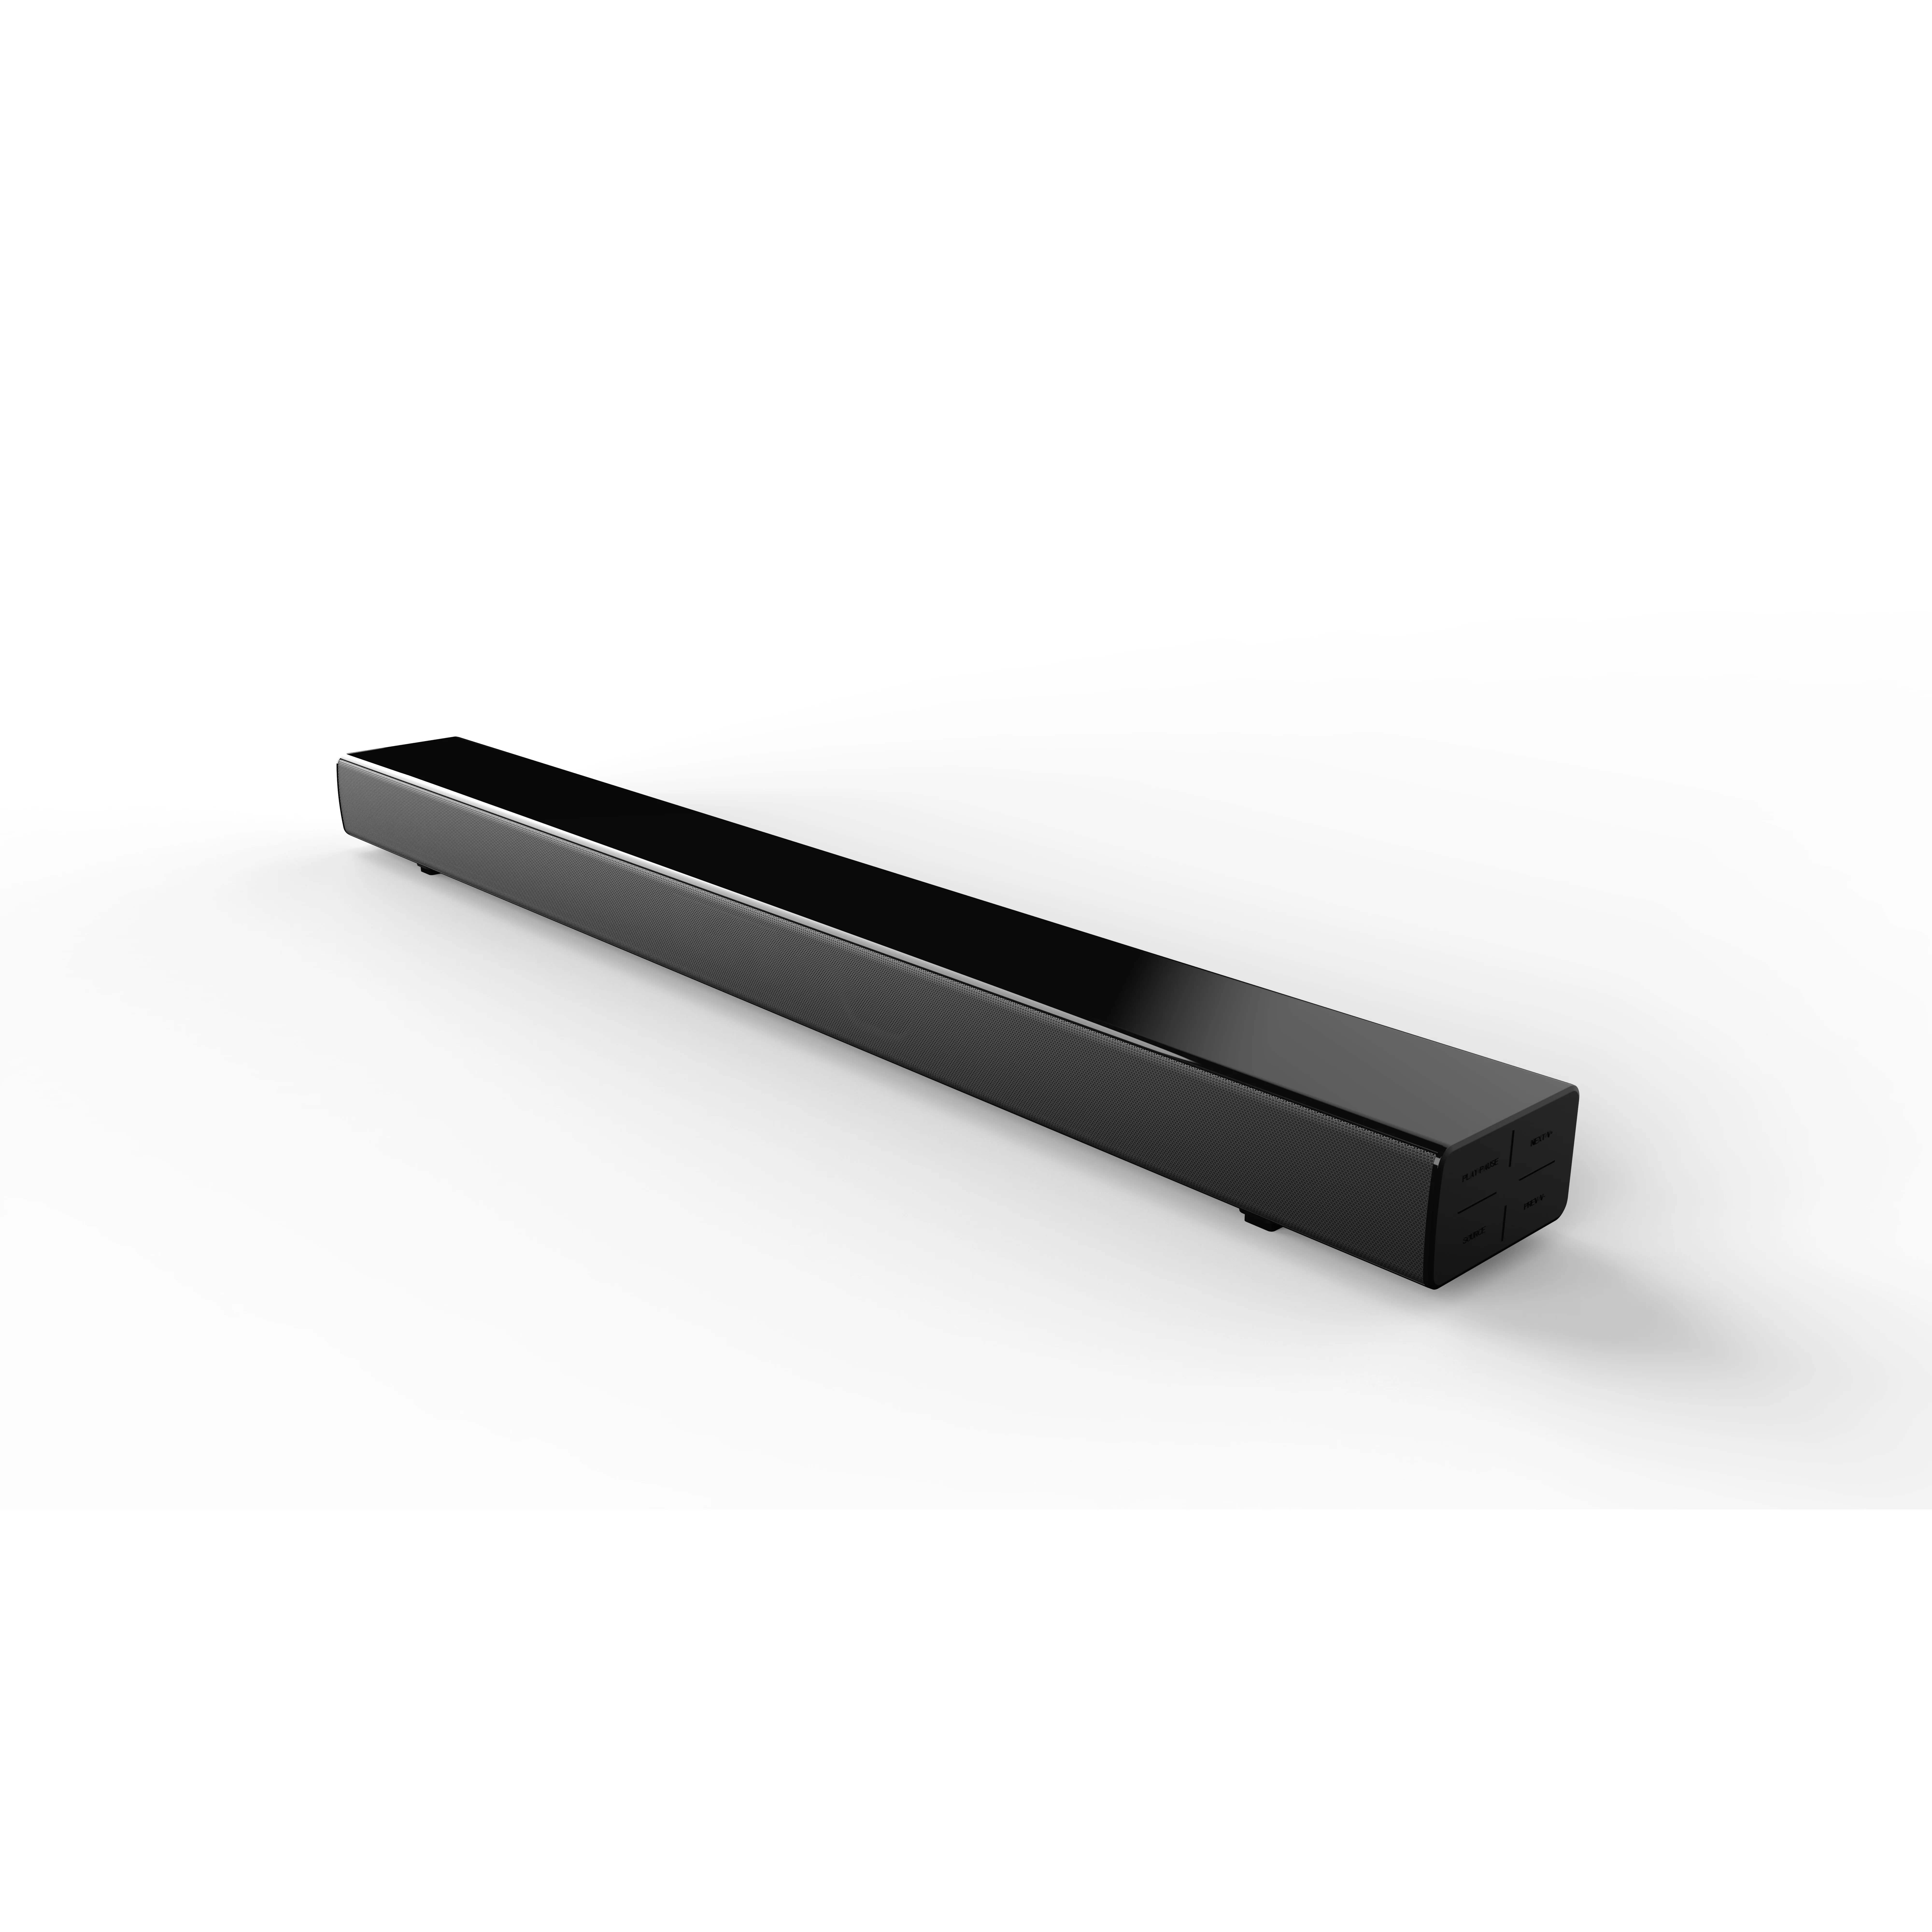 Newest 2022 Built in Subwoofer Sound bar 3D Surround Home theatre system DSP Bluetooth Wireless Soundbar For TV Phone Computer